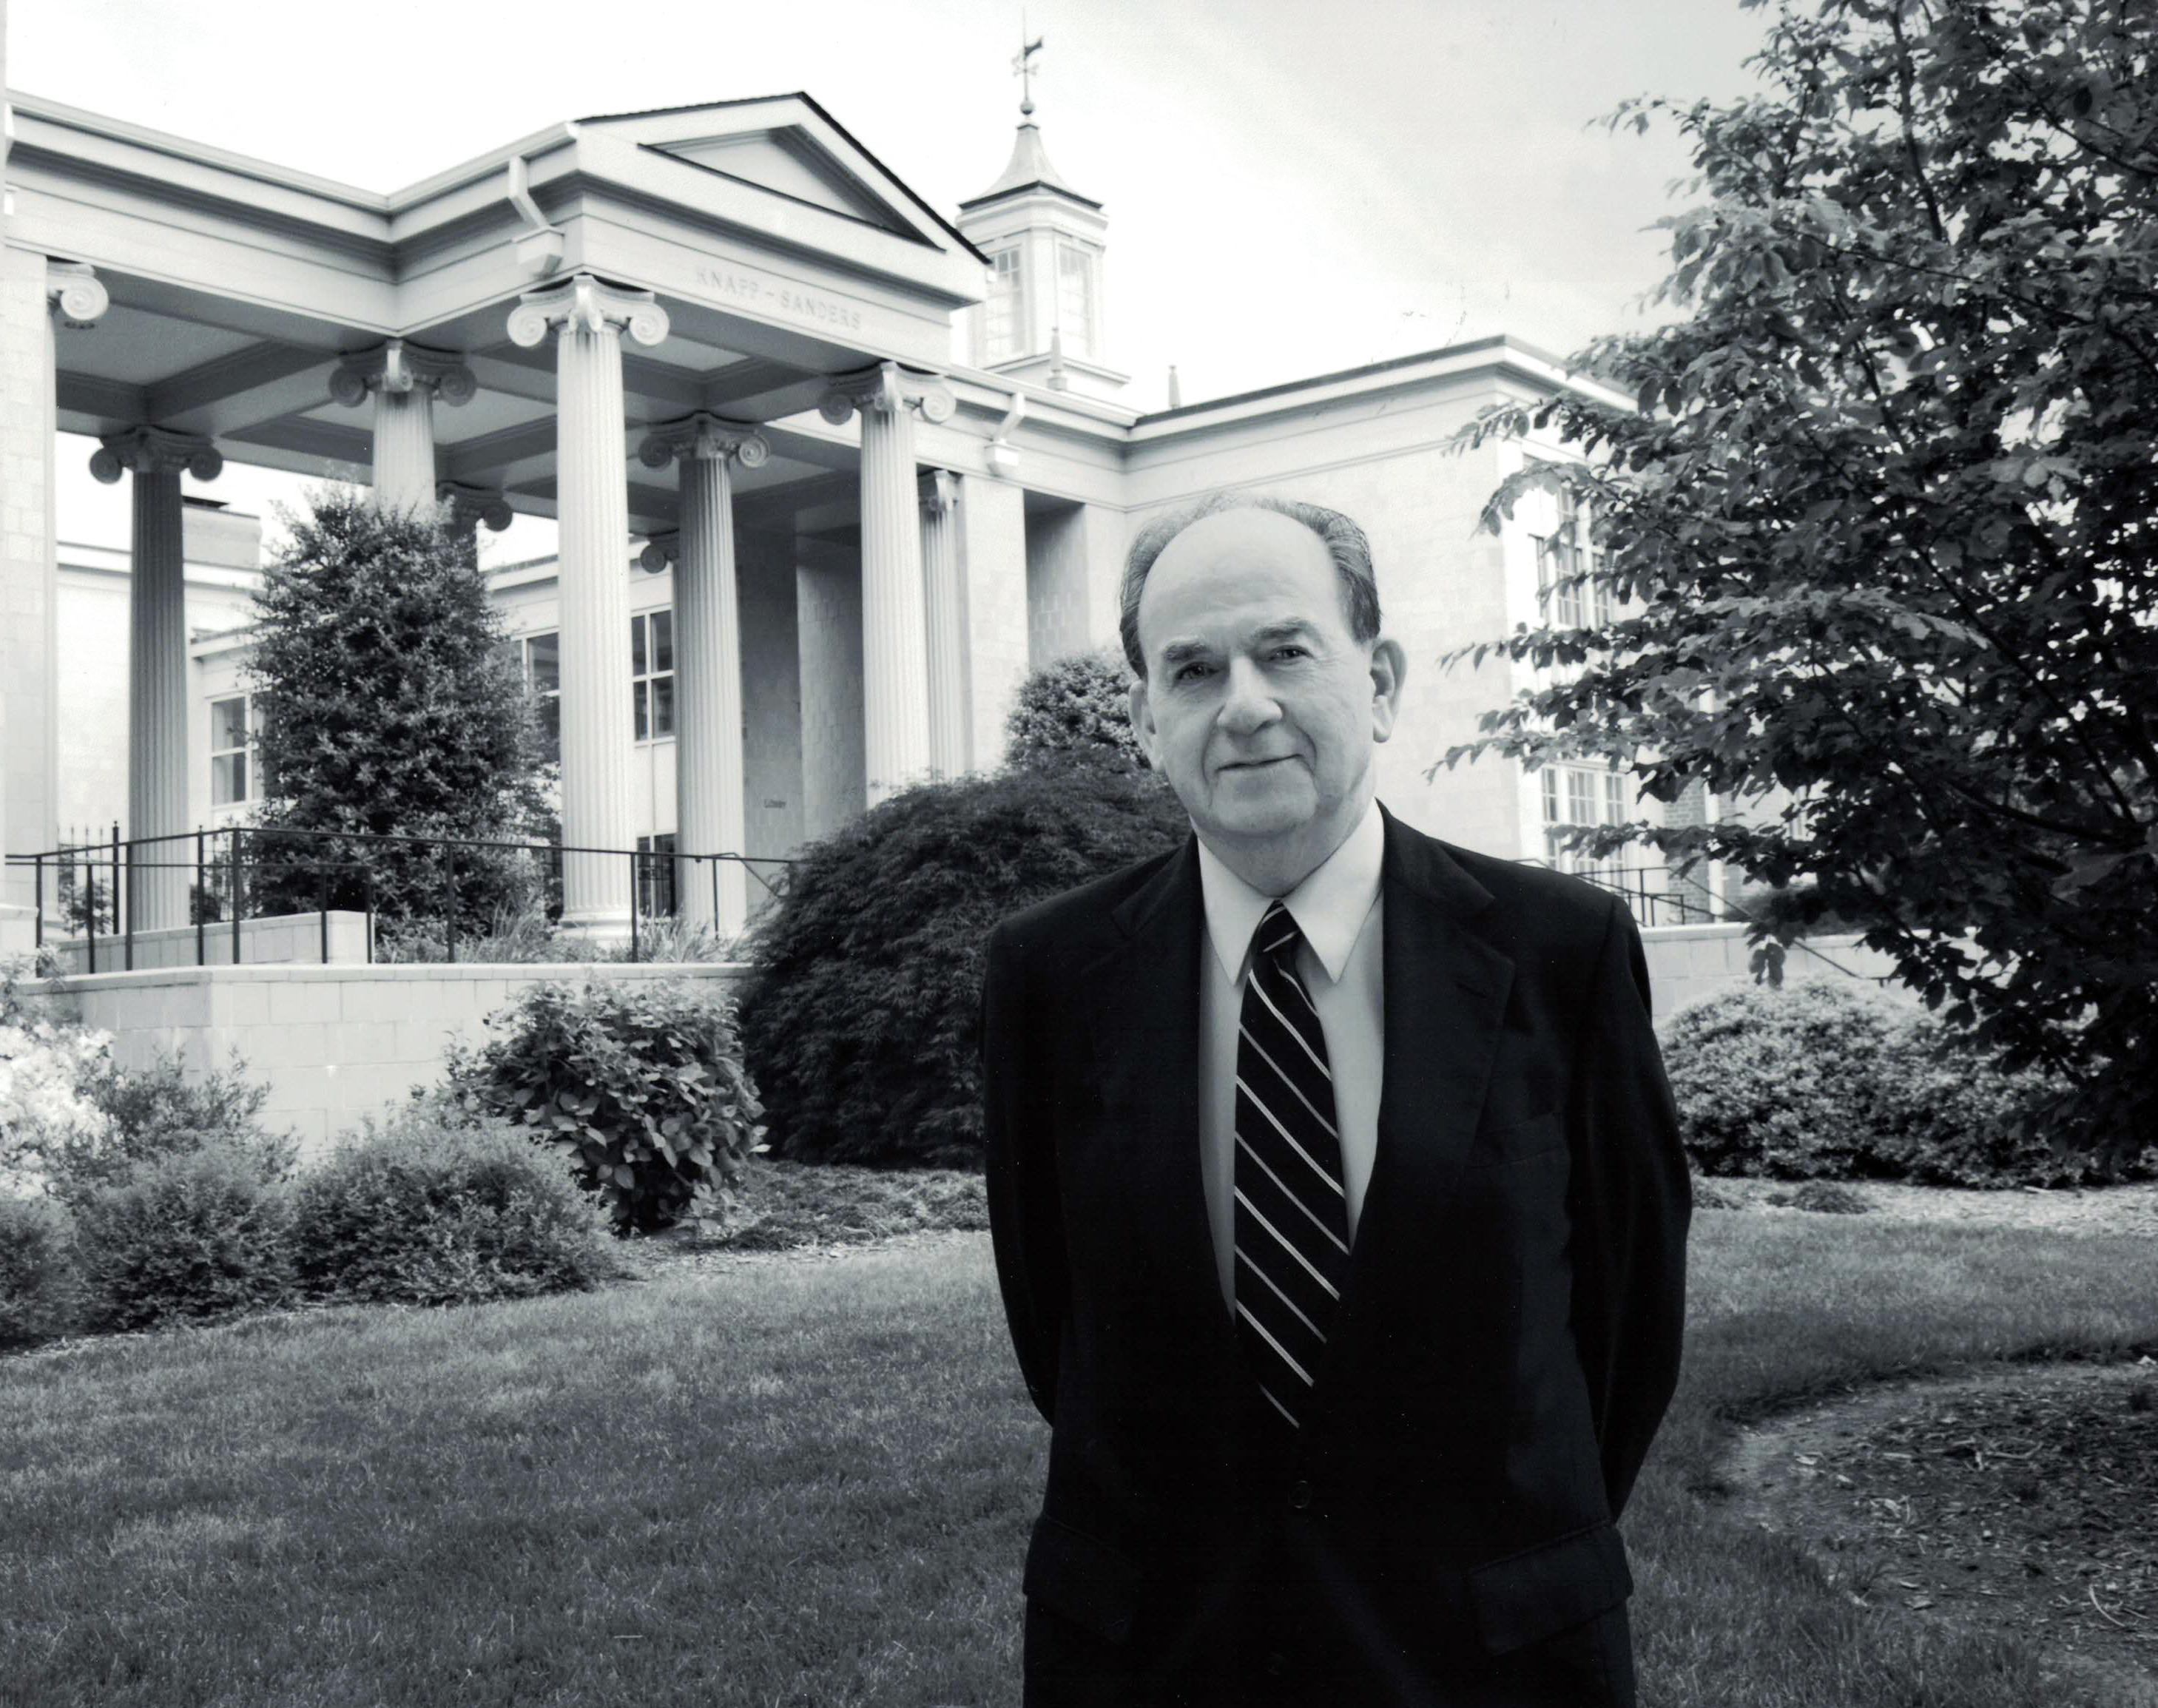 John Sanders at the School of Government